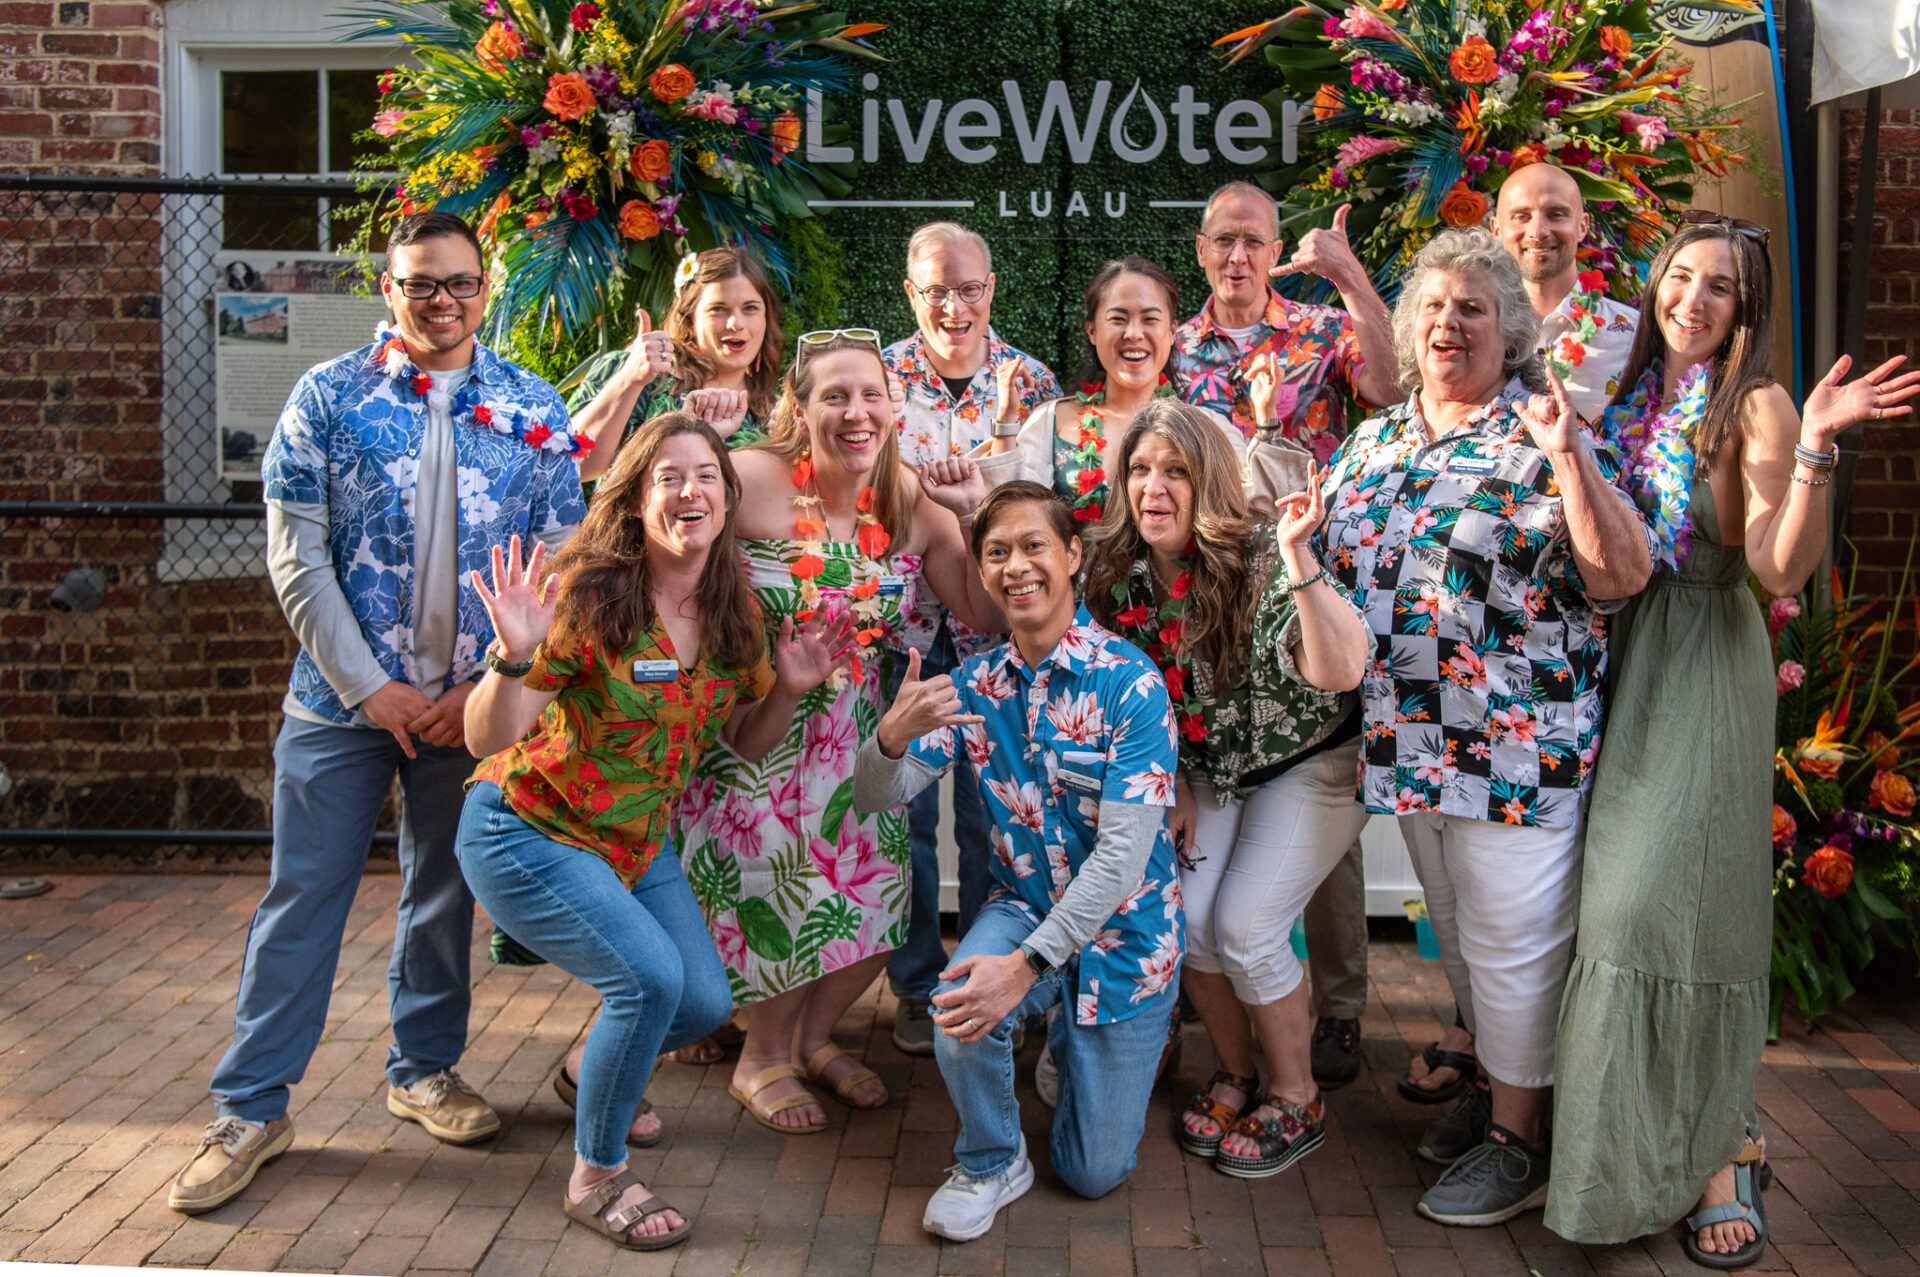 Live Water Foundation board members pose as a group in front of a banner that reads "LiveWater". They are flanked by tropical flowers and wearing luau-themed clothing.